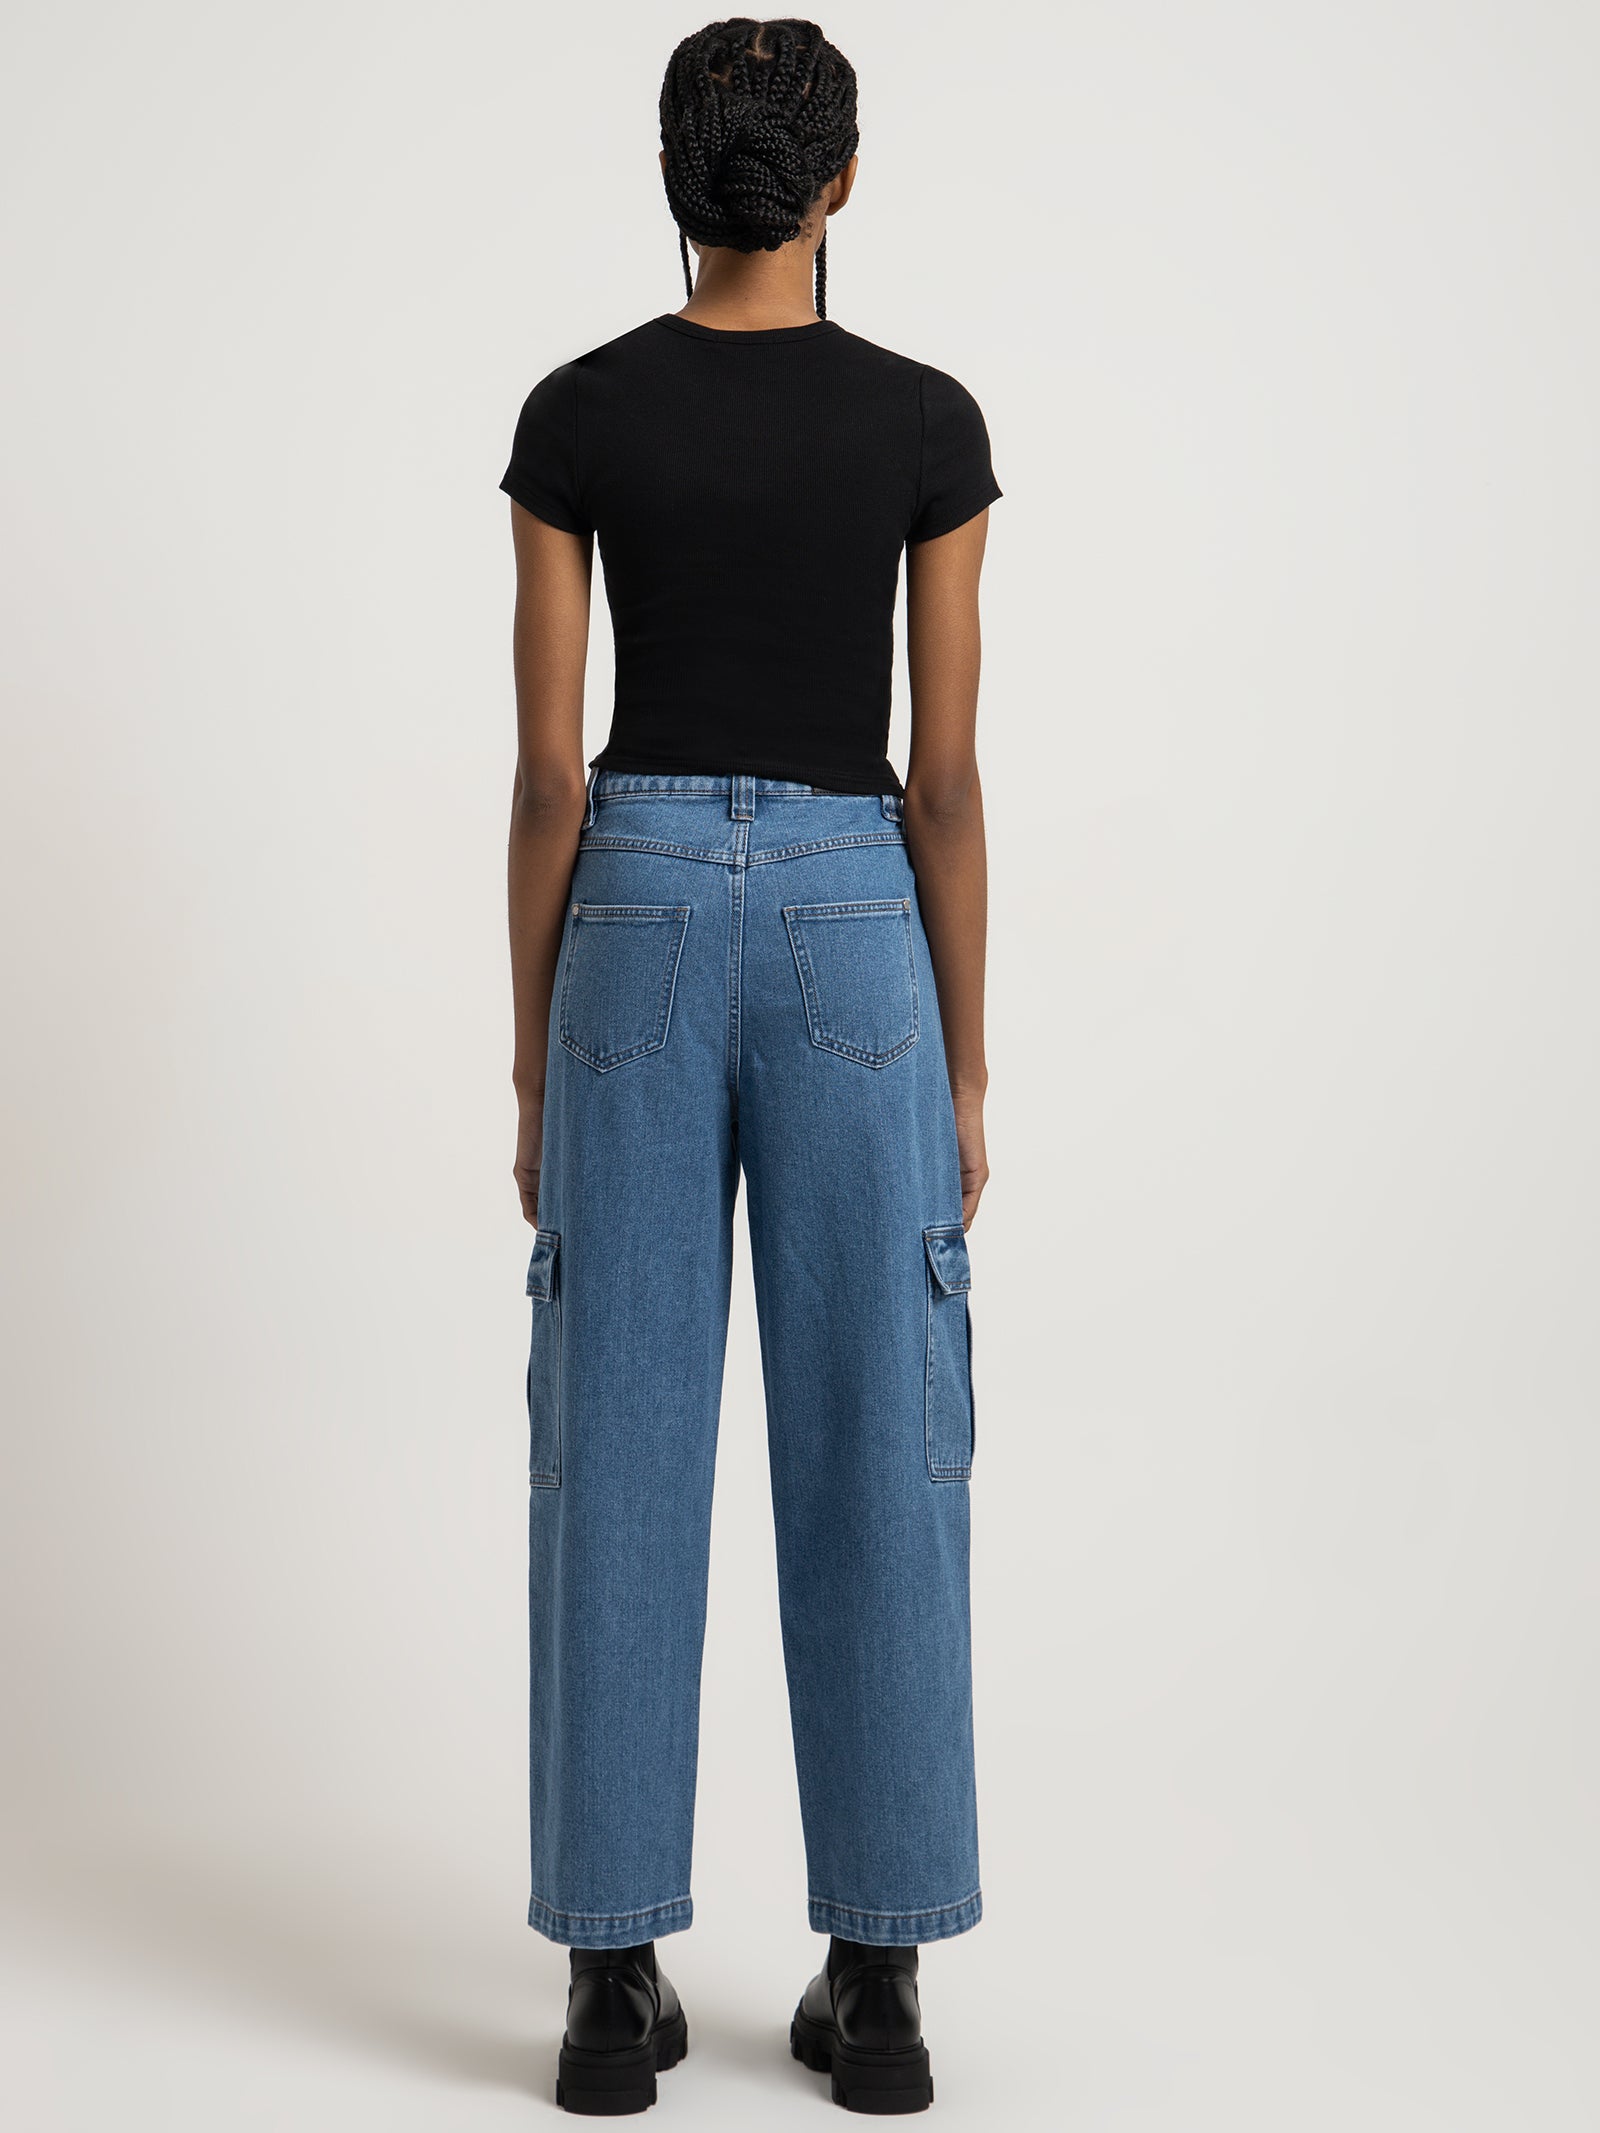 Blair Workwear Jeans in River